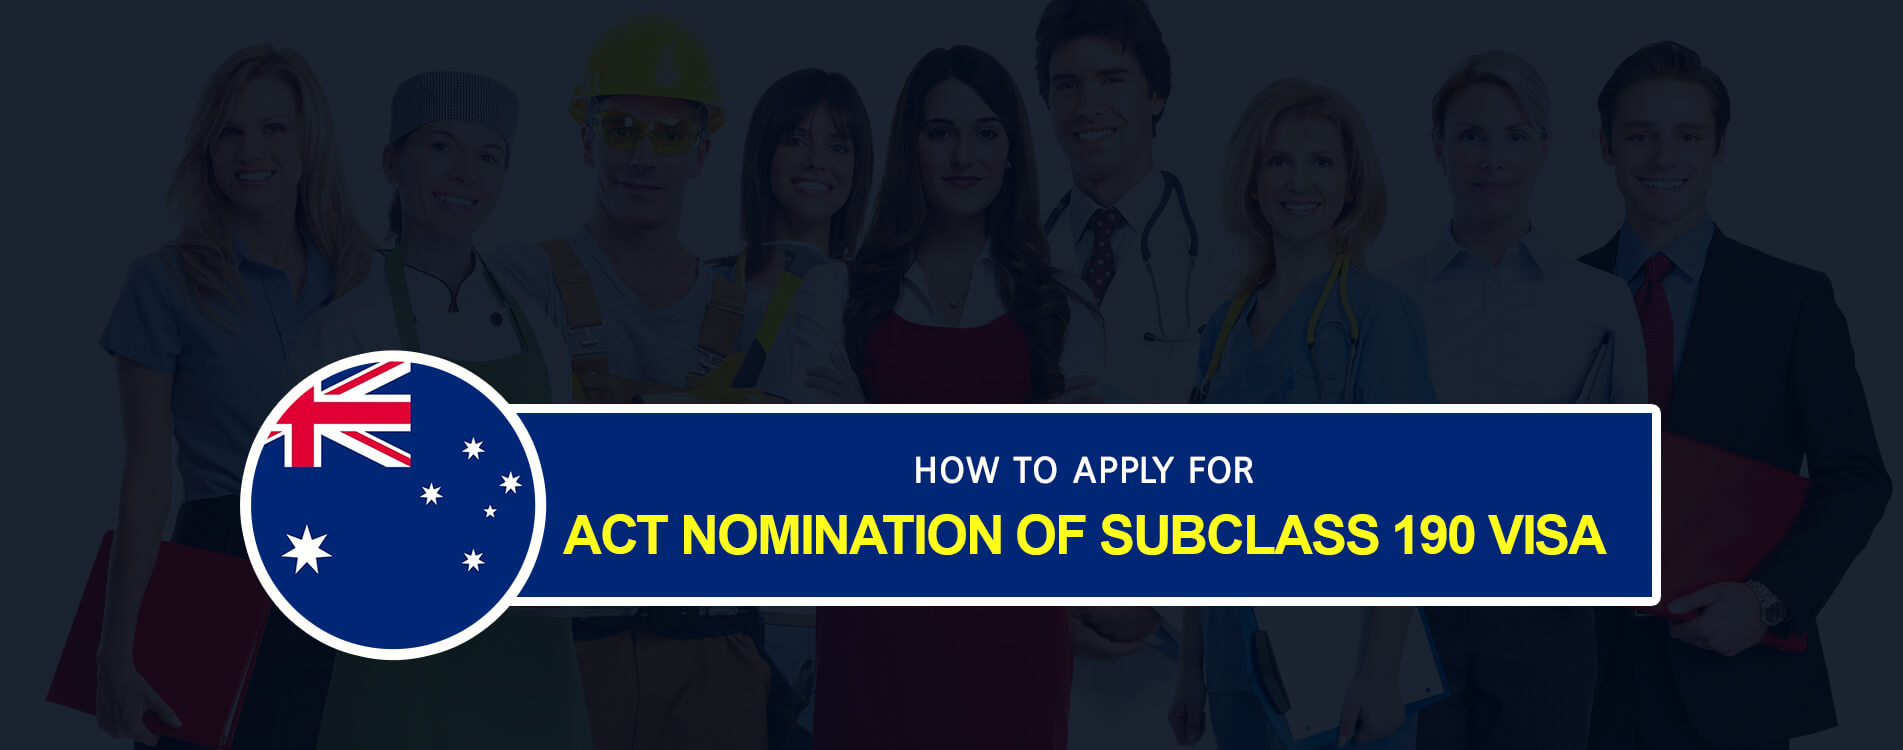 How to Apply for ACT Nomination of Subclass 190 Visa